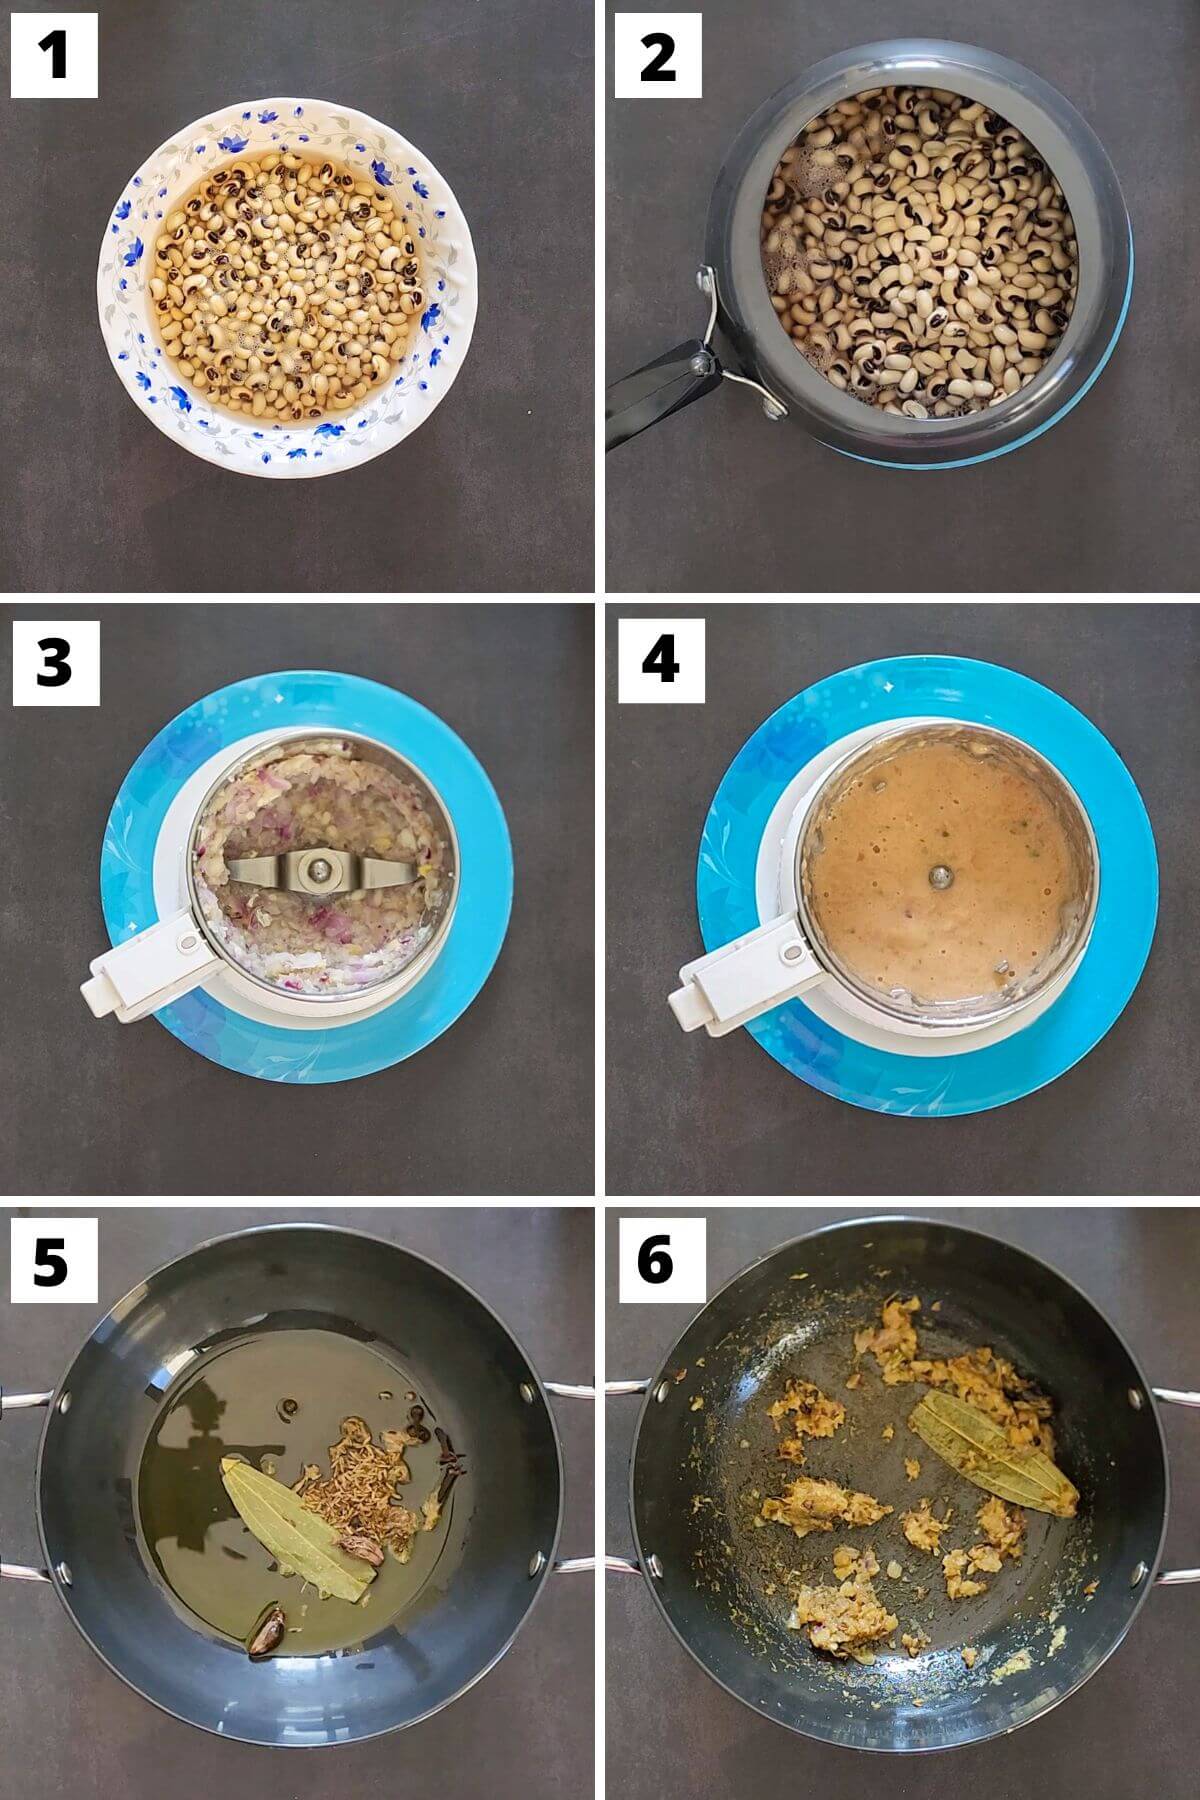 Collage of images of steps 1 to 6 of lobia masala recipe.